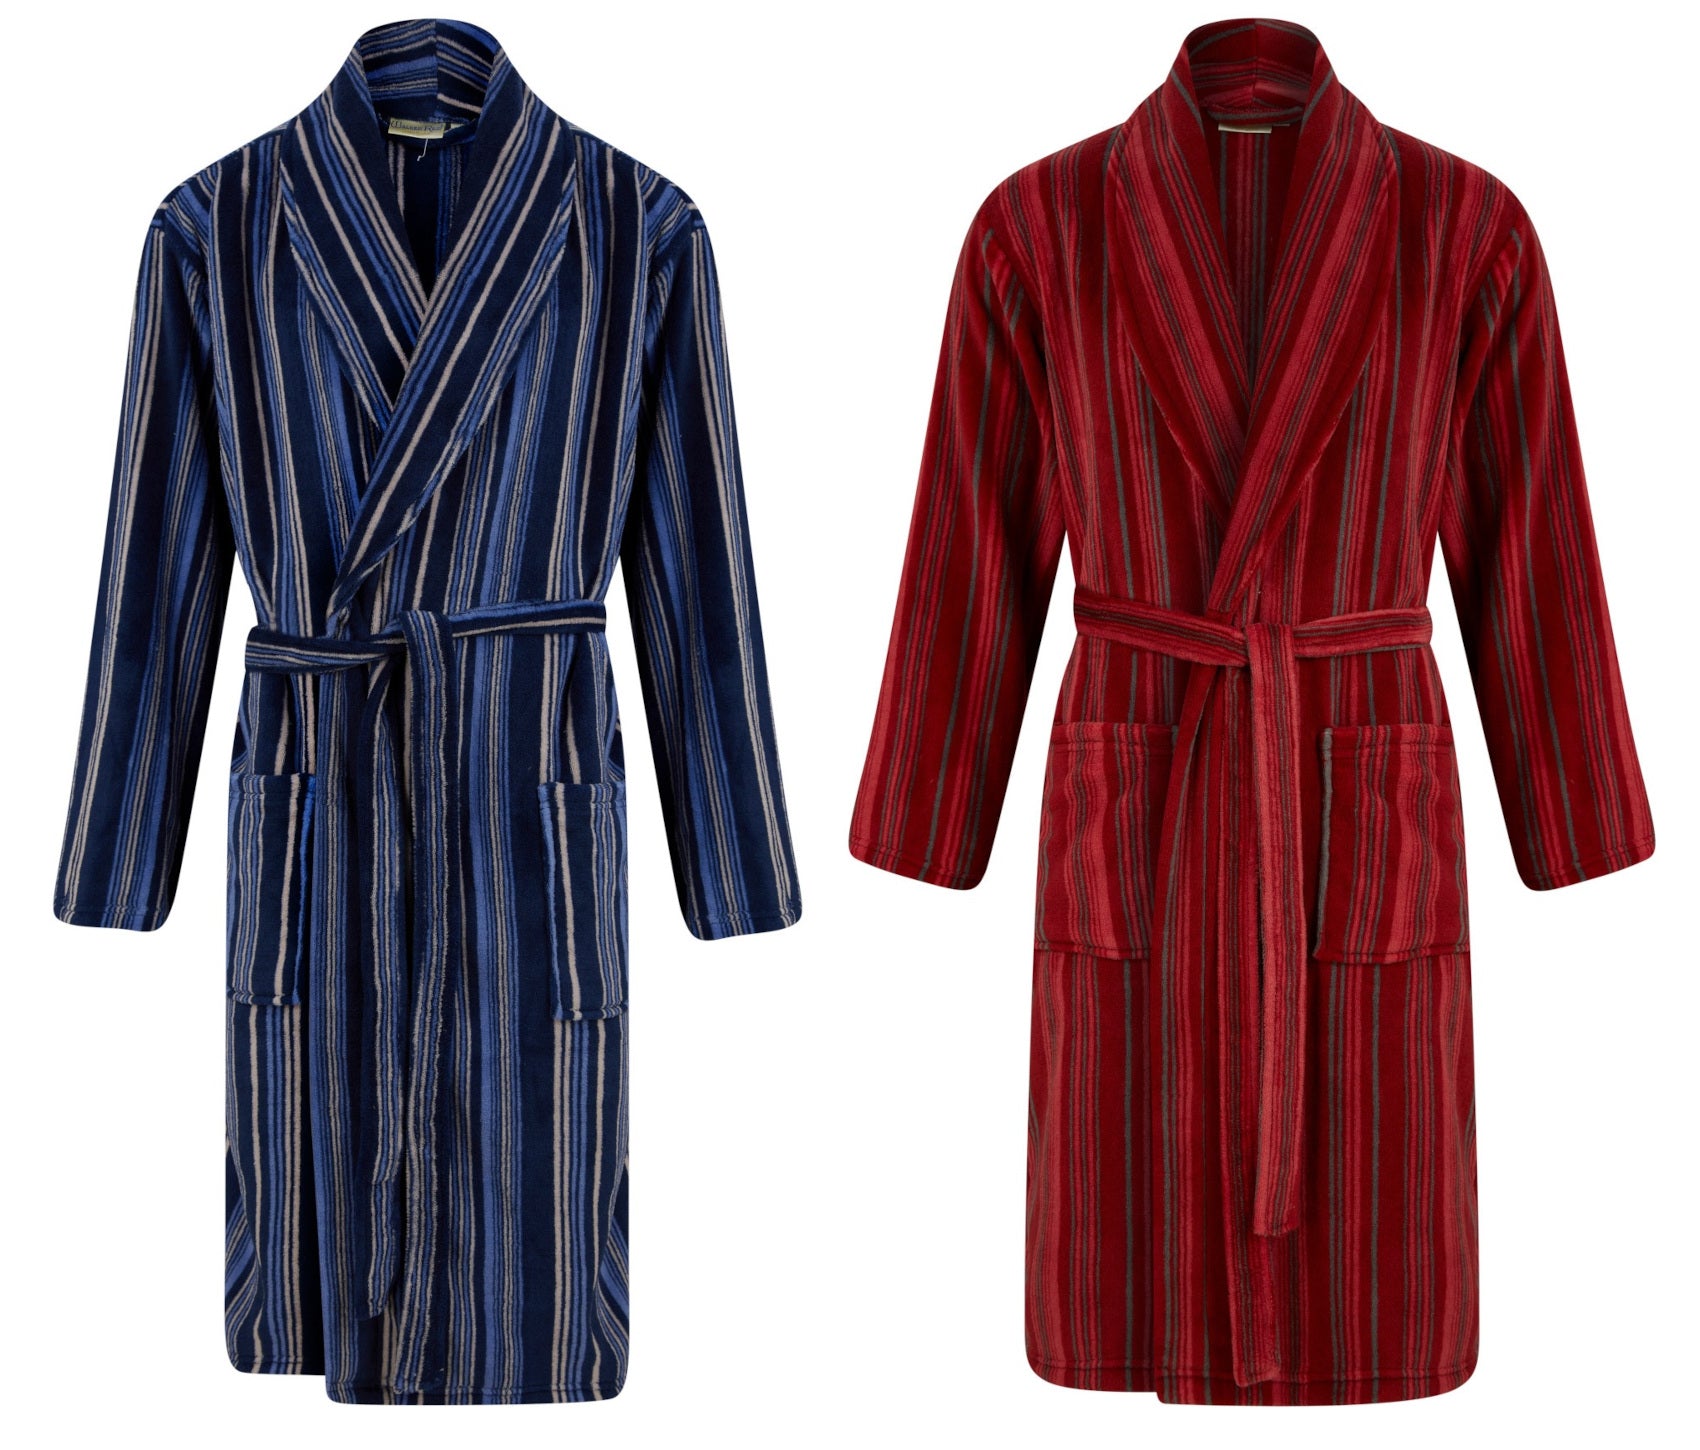 Spa Robe Terry Cloth - Spa Robes For Men | RobesNmore